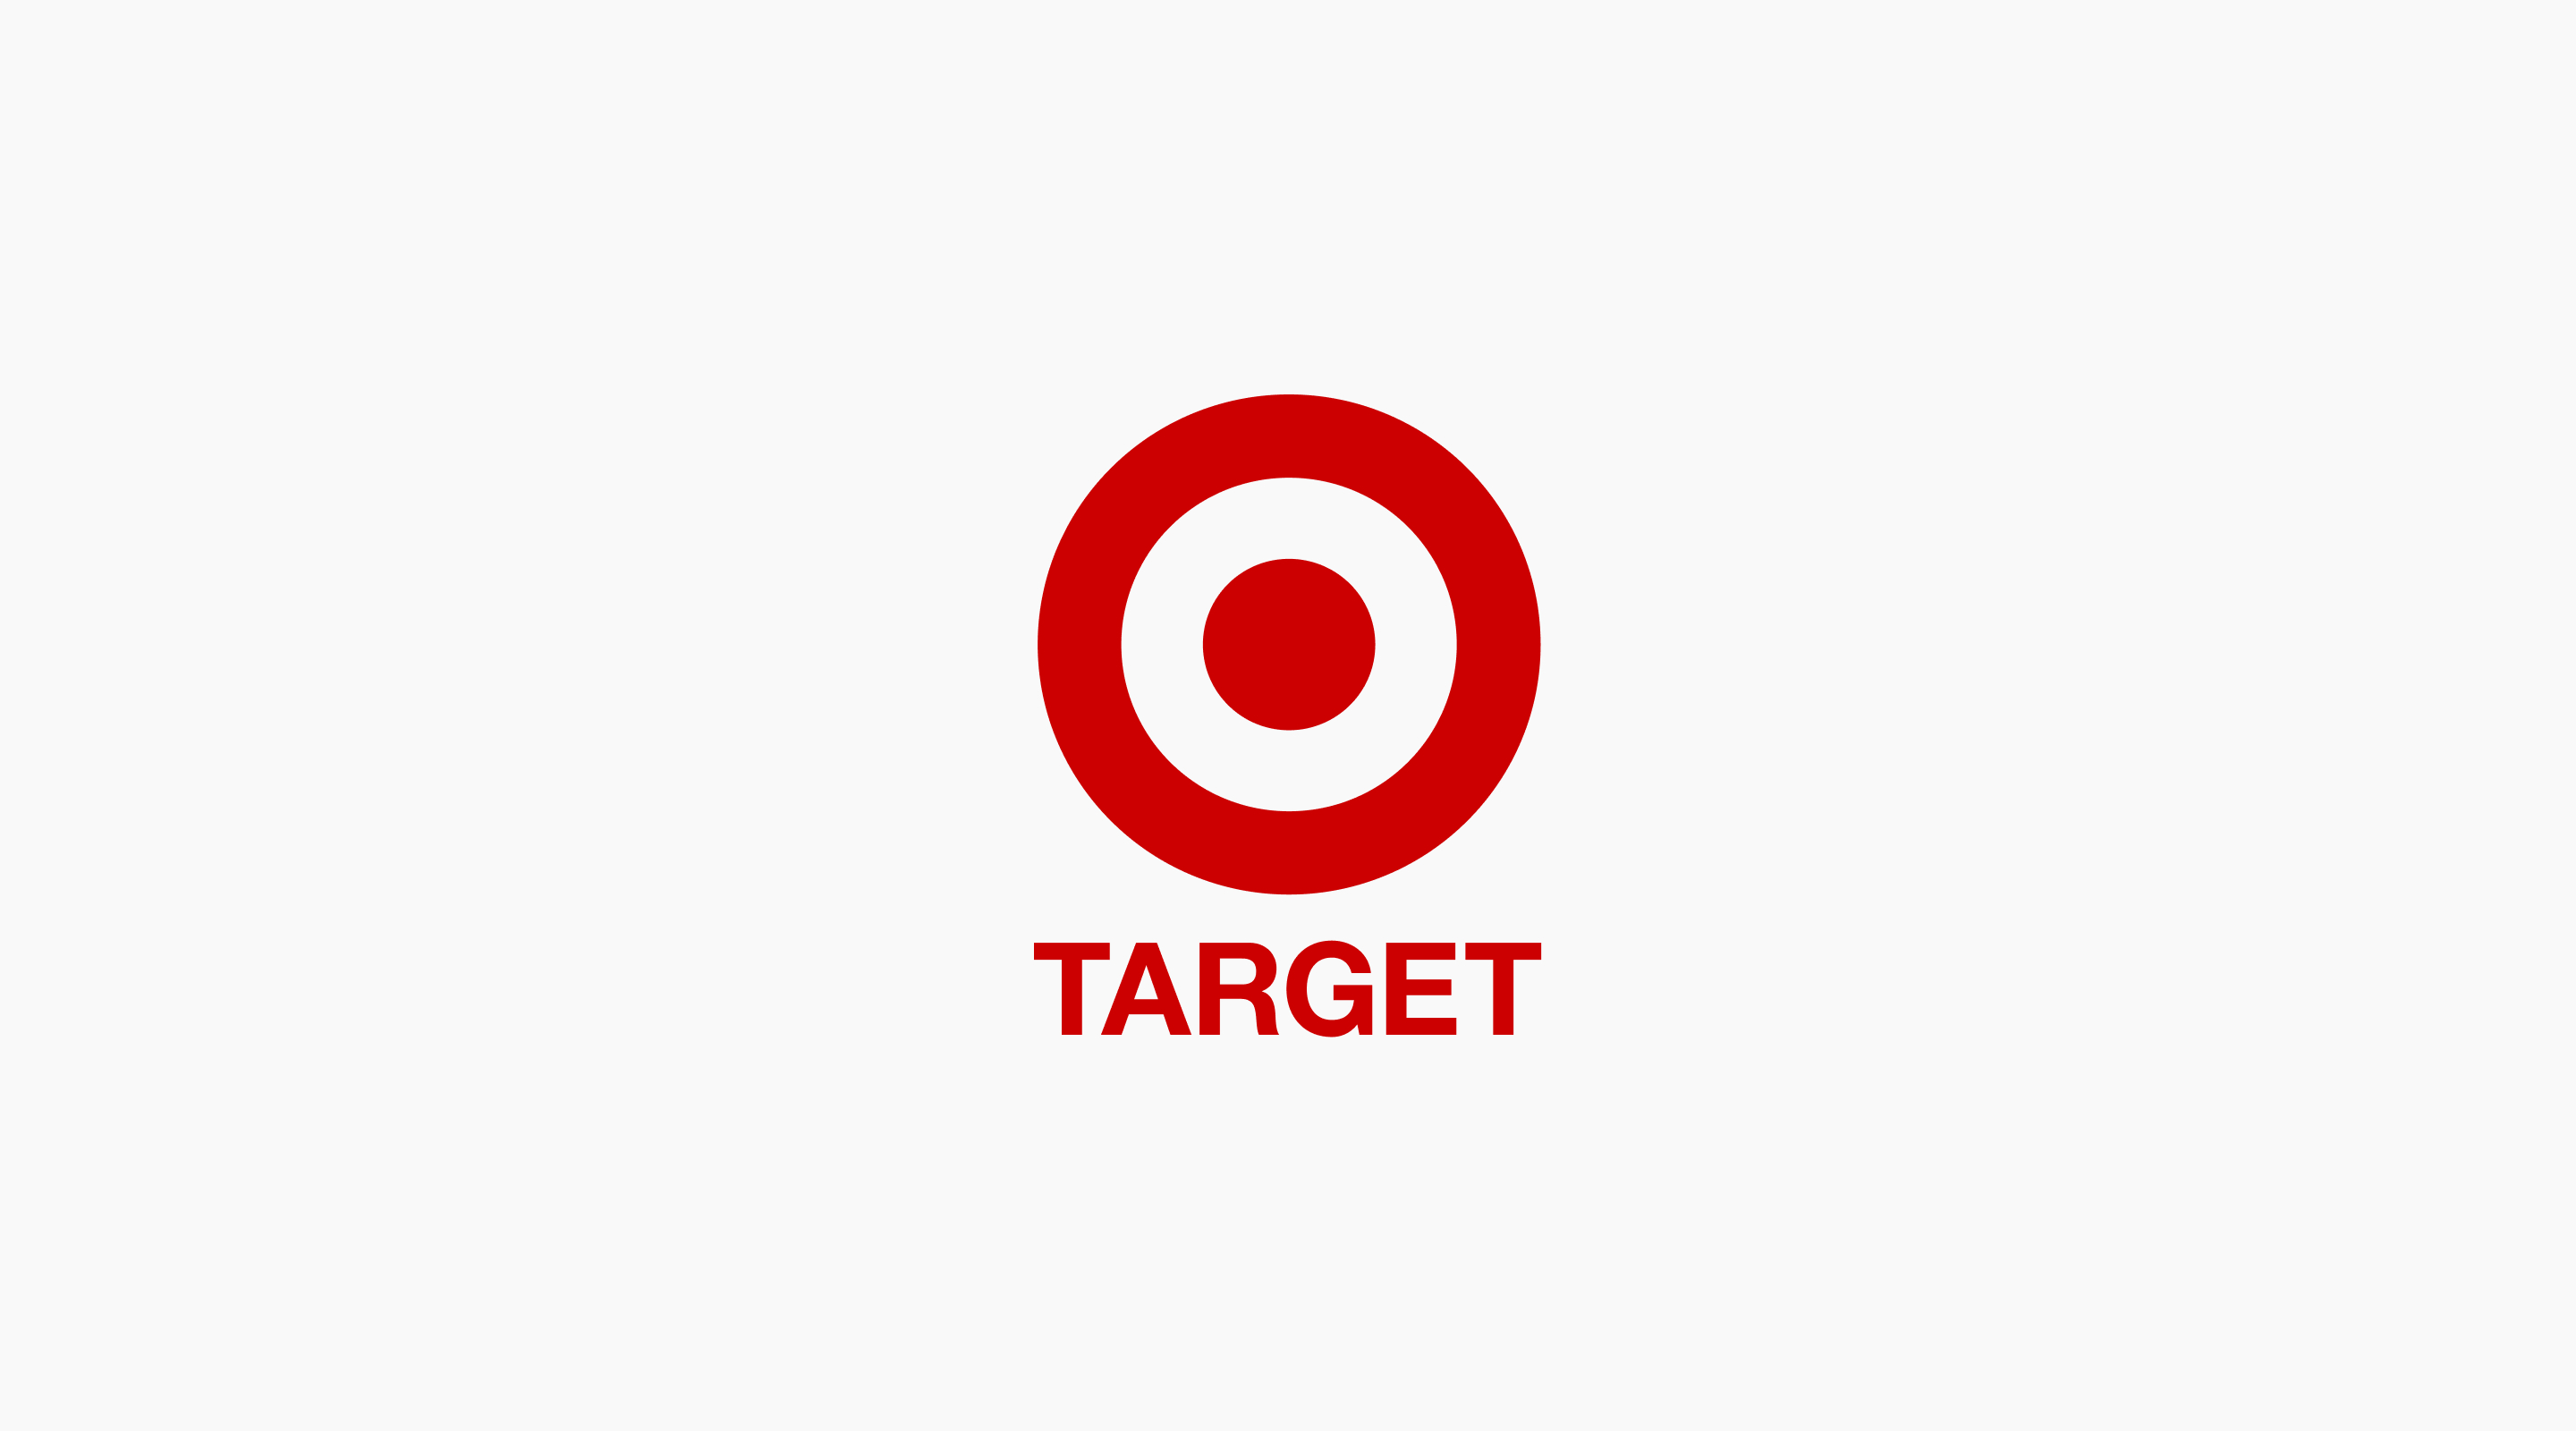 Target logo on a neutral background